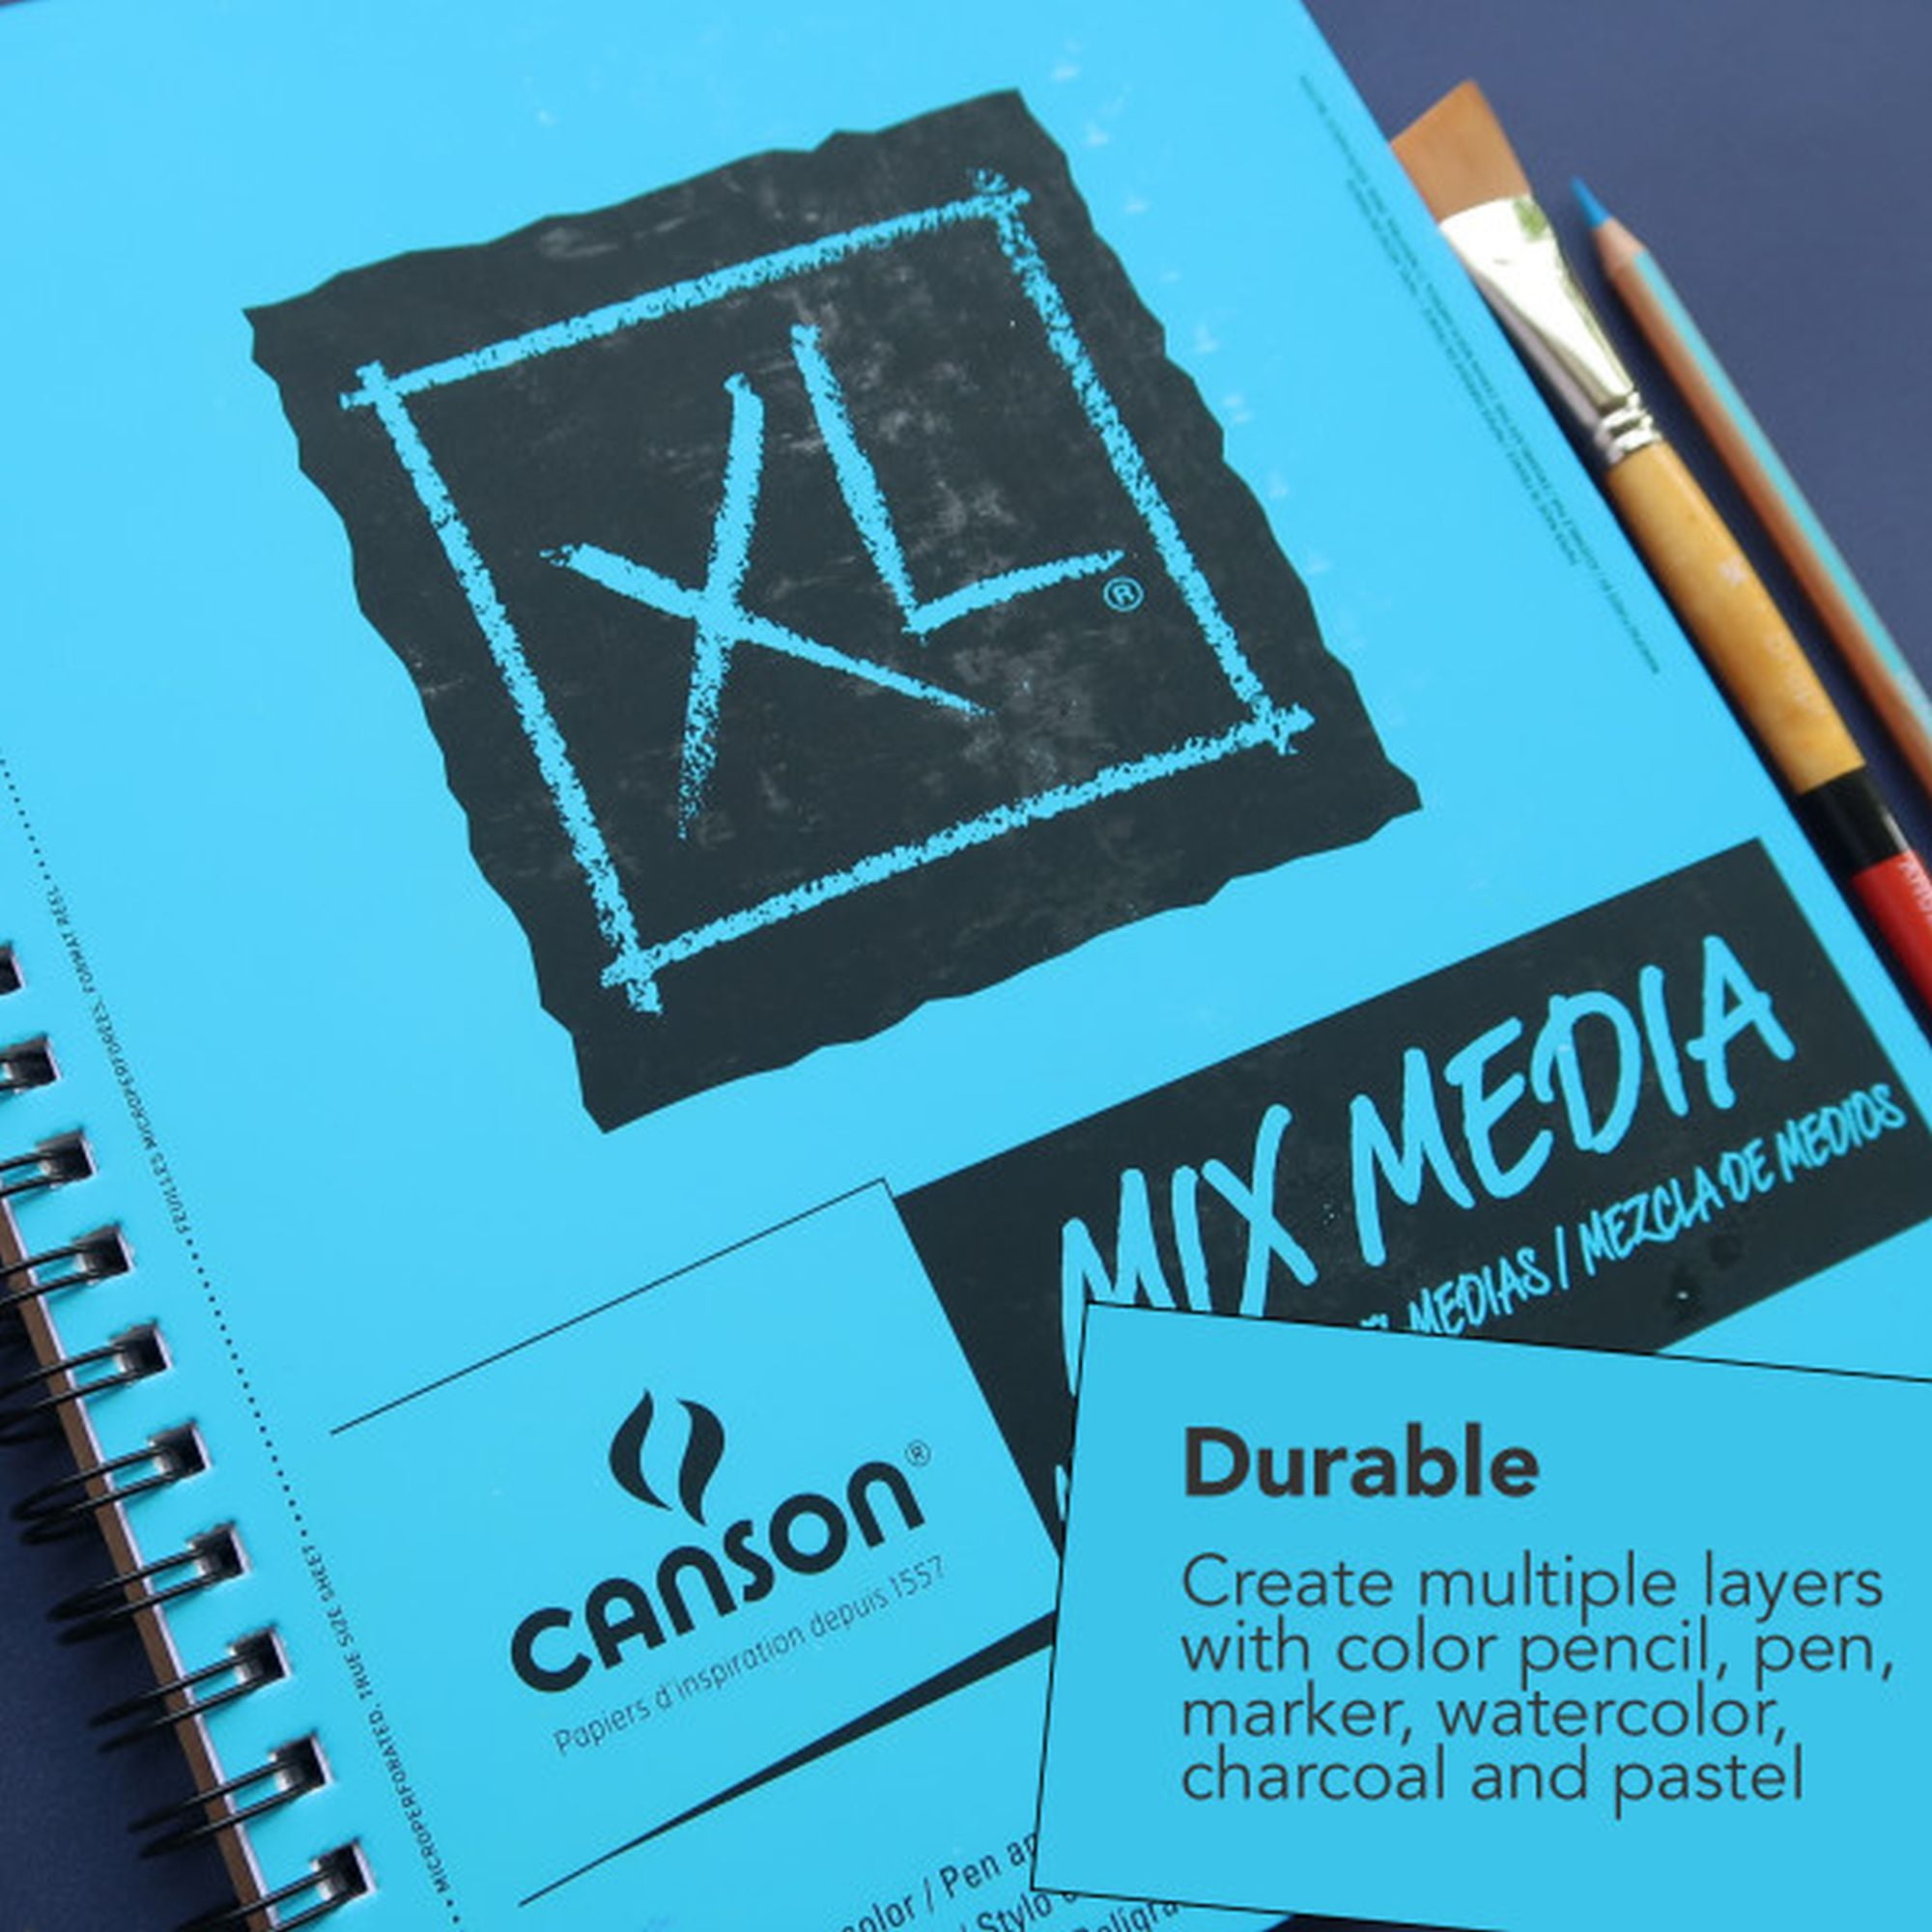  Canson XL Series Mixed Media Pad, Rough Texture, Side Wire,  9x12 inches, 50 Sheets – Heavyweight Art Paper for Watercolor, Gouache,  Marker, Painting, Drawing, Sketching : Arts, Crafts & Sewing